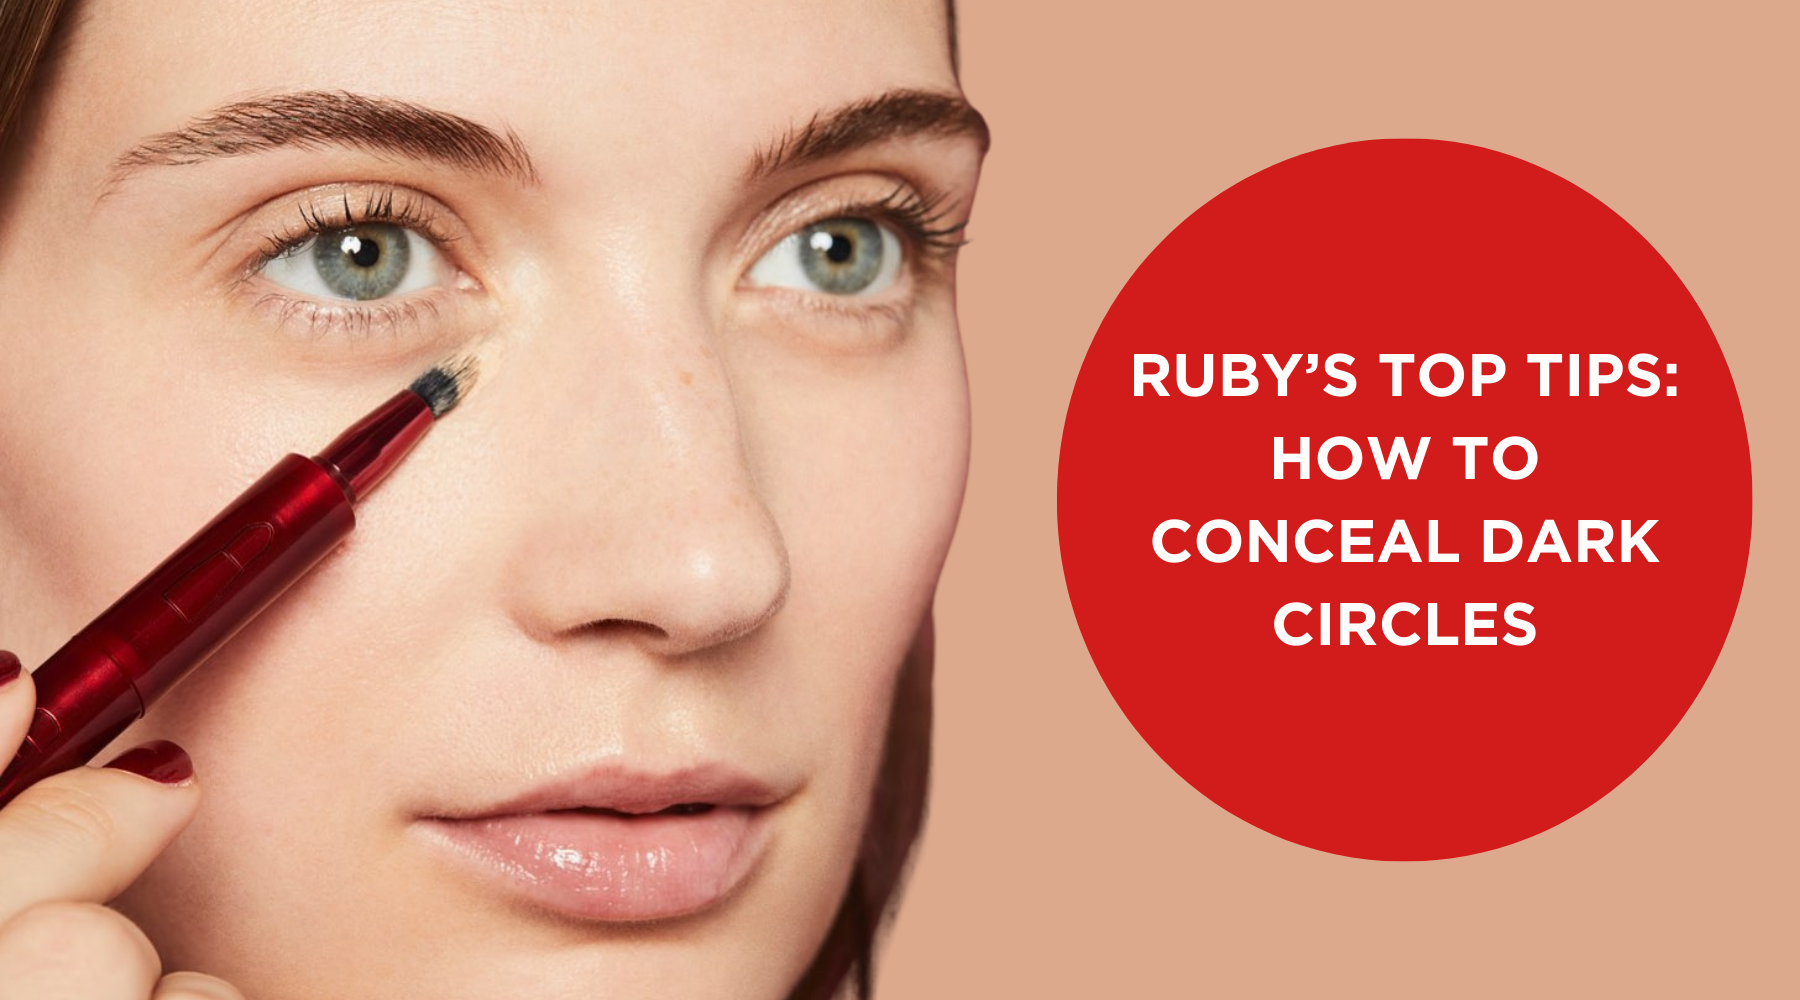 RUBY'S TOP TIPS: HOW TO CONCEAL DARK CIRCLES